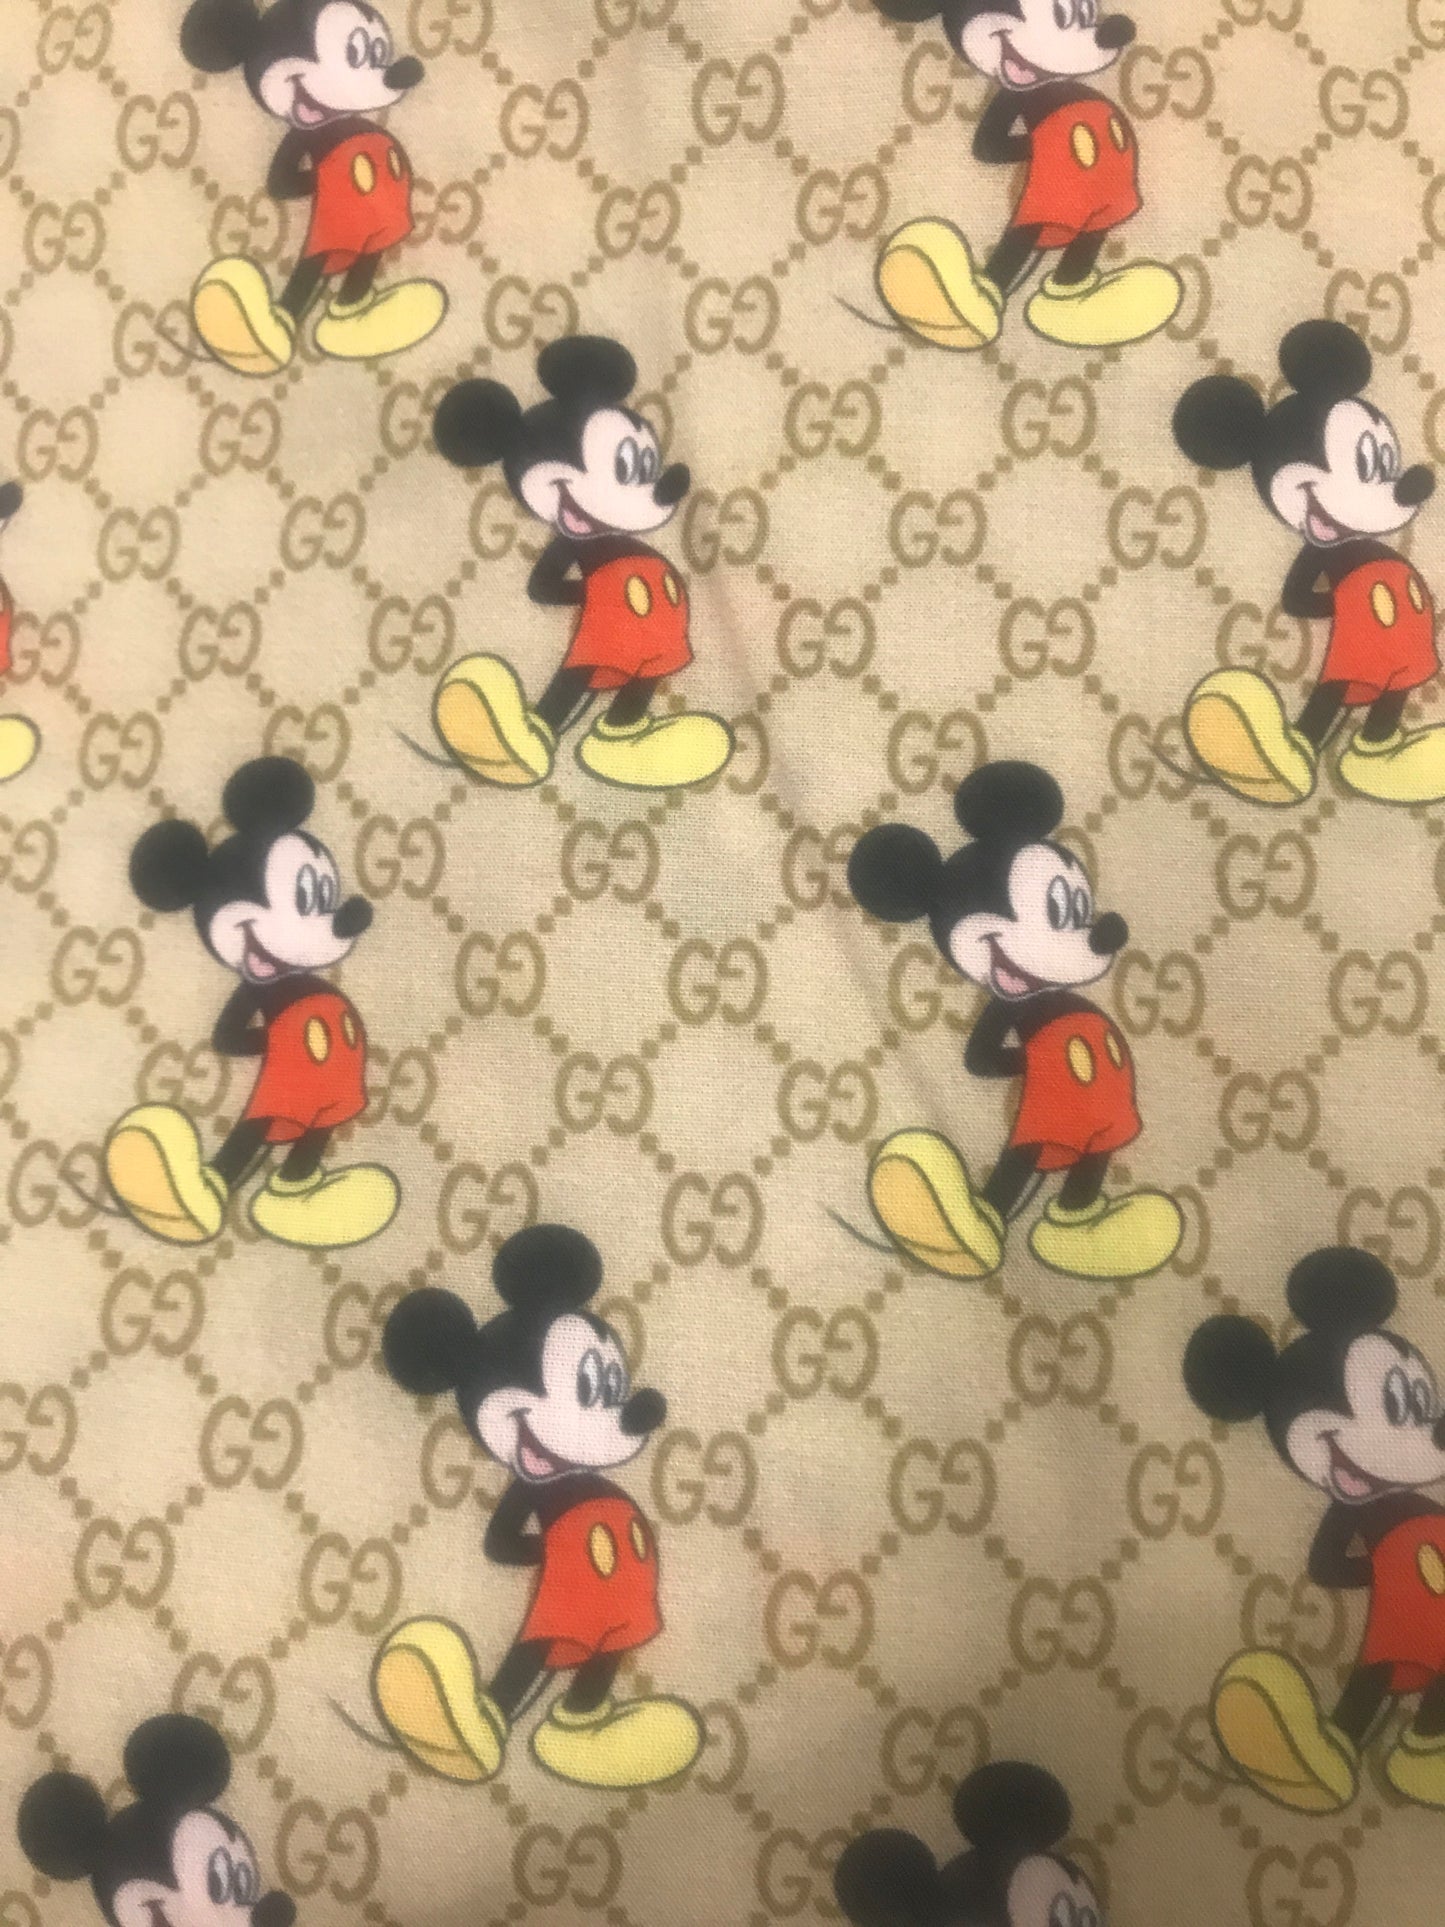 Famous Designer Disney's Mickey Mouse & Gucci GG  Fabric